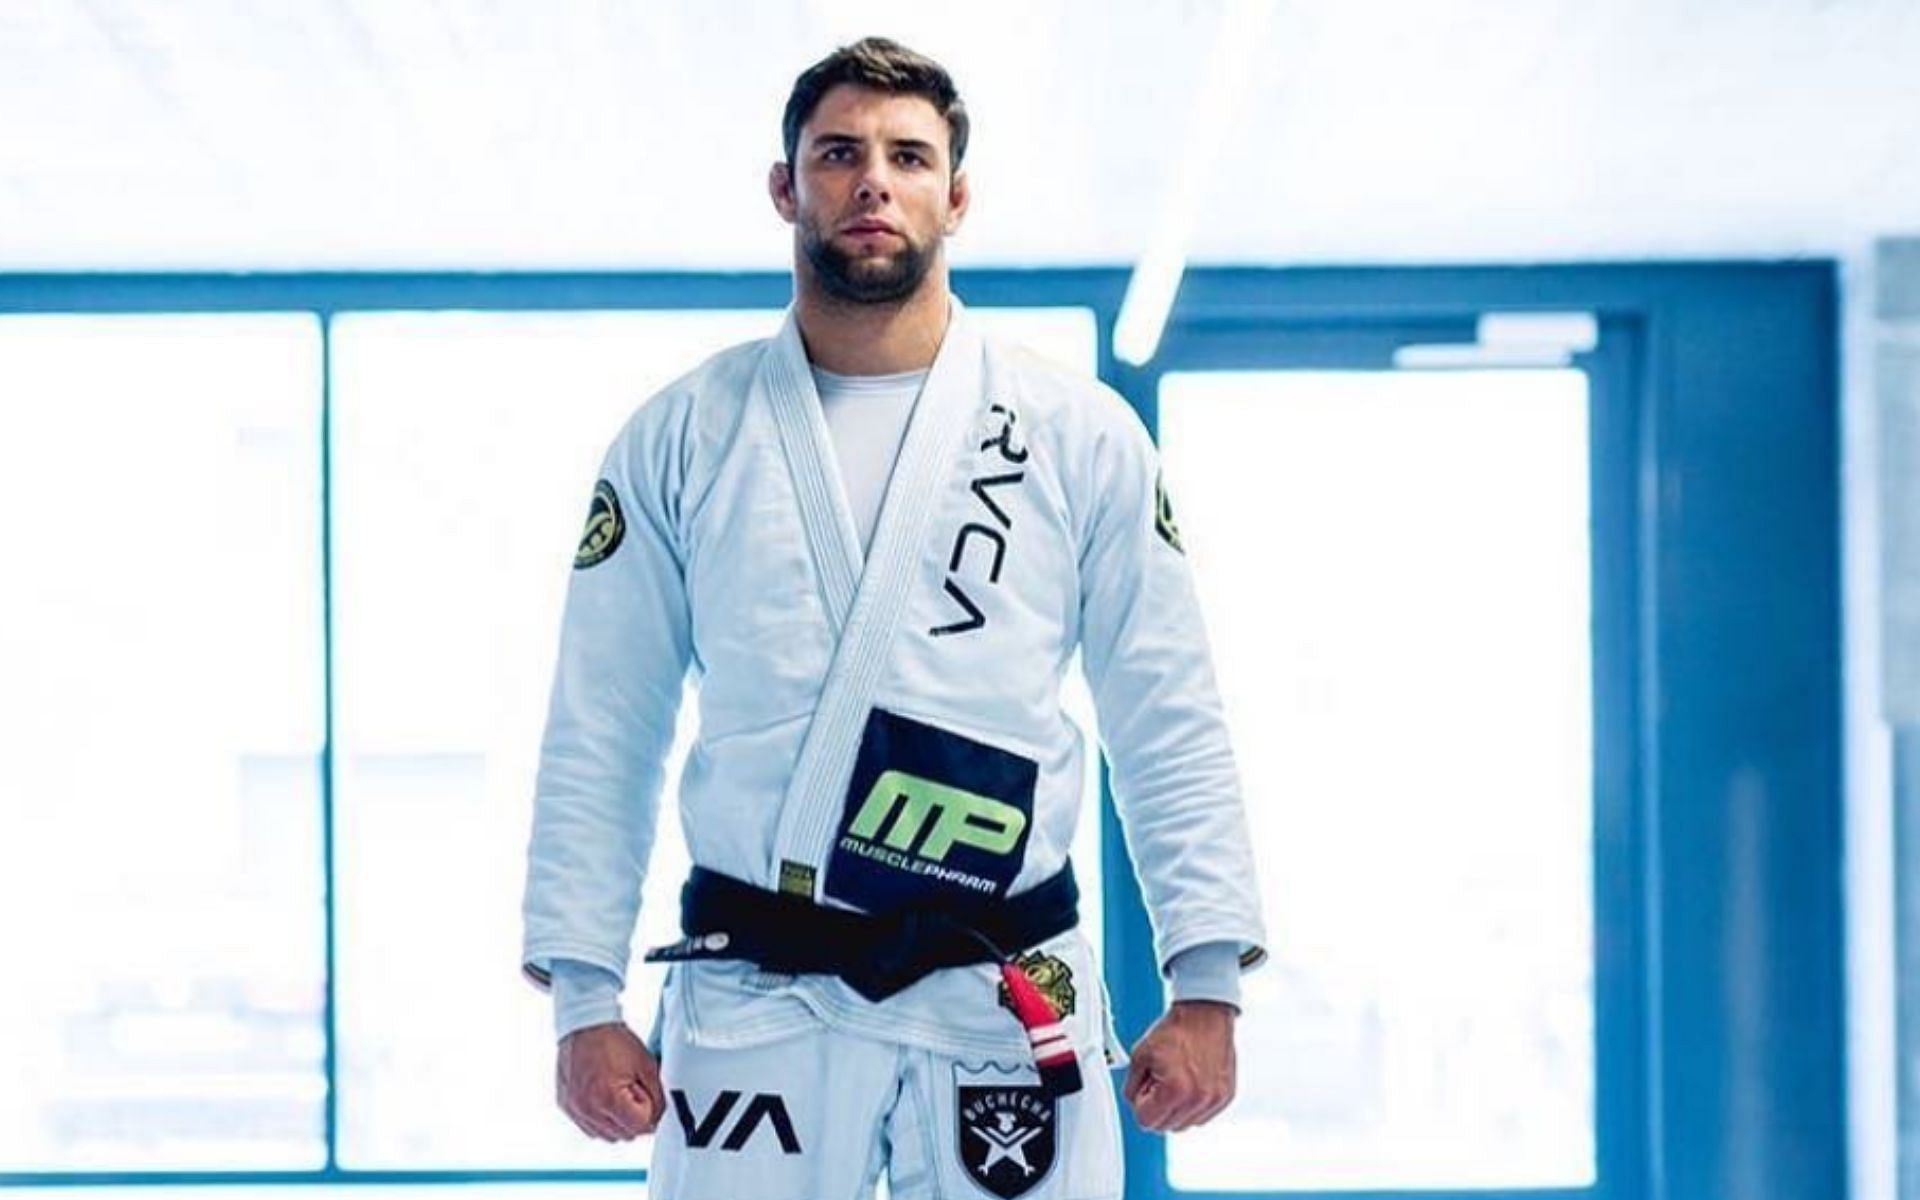 Buchecha getting ready for ONE157 (Image from @marcusbuchecha Instagram)